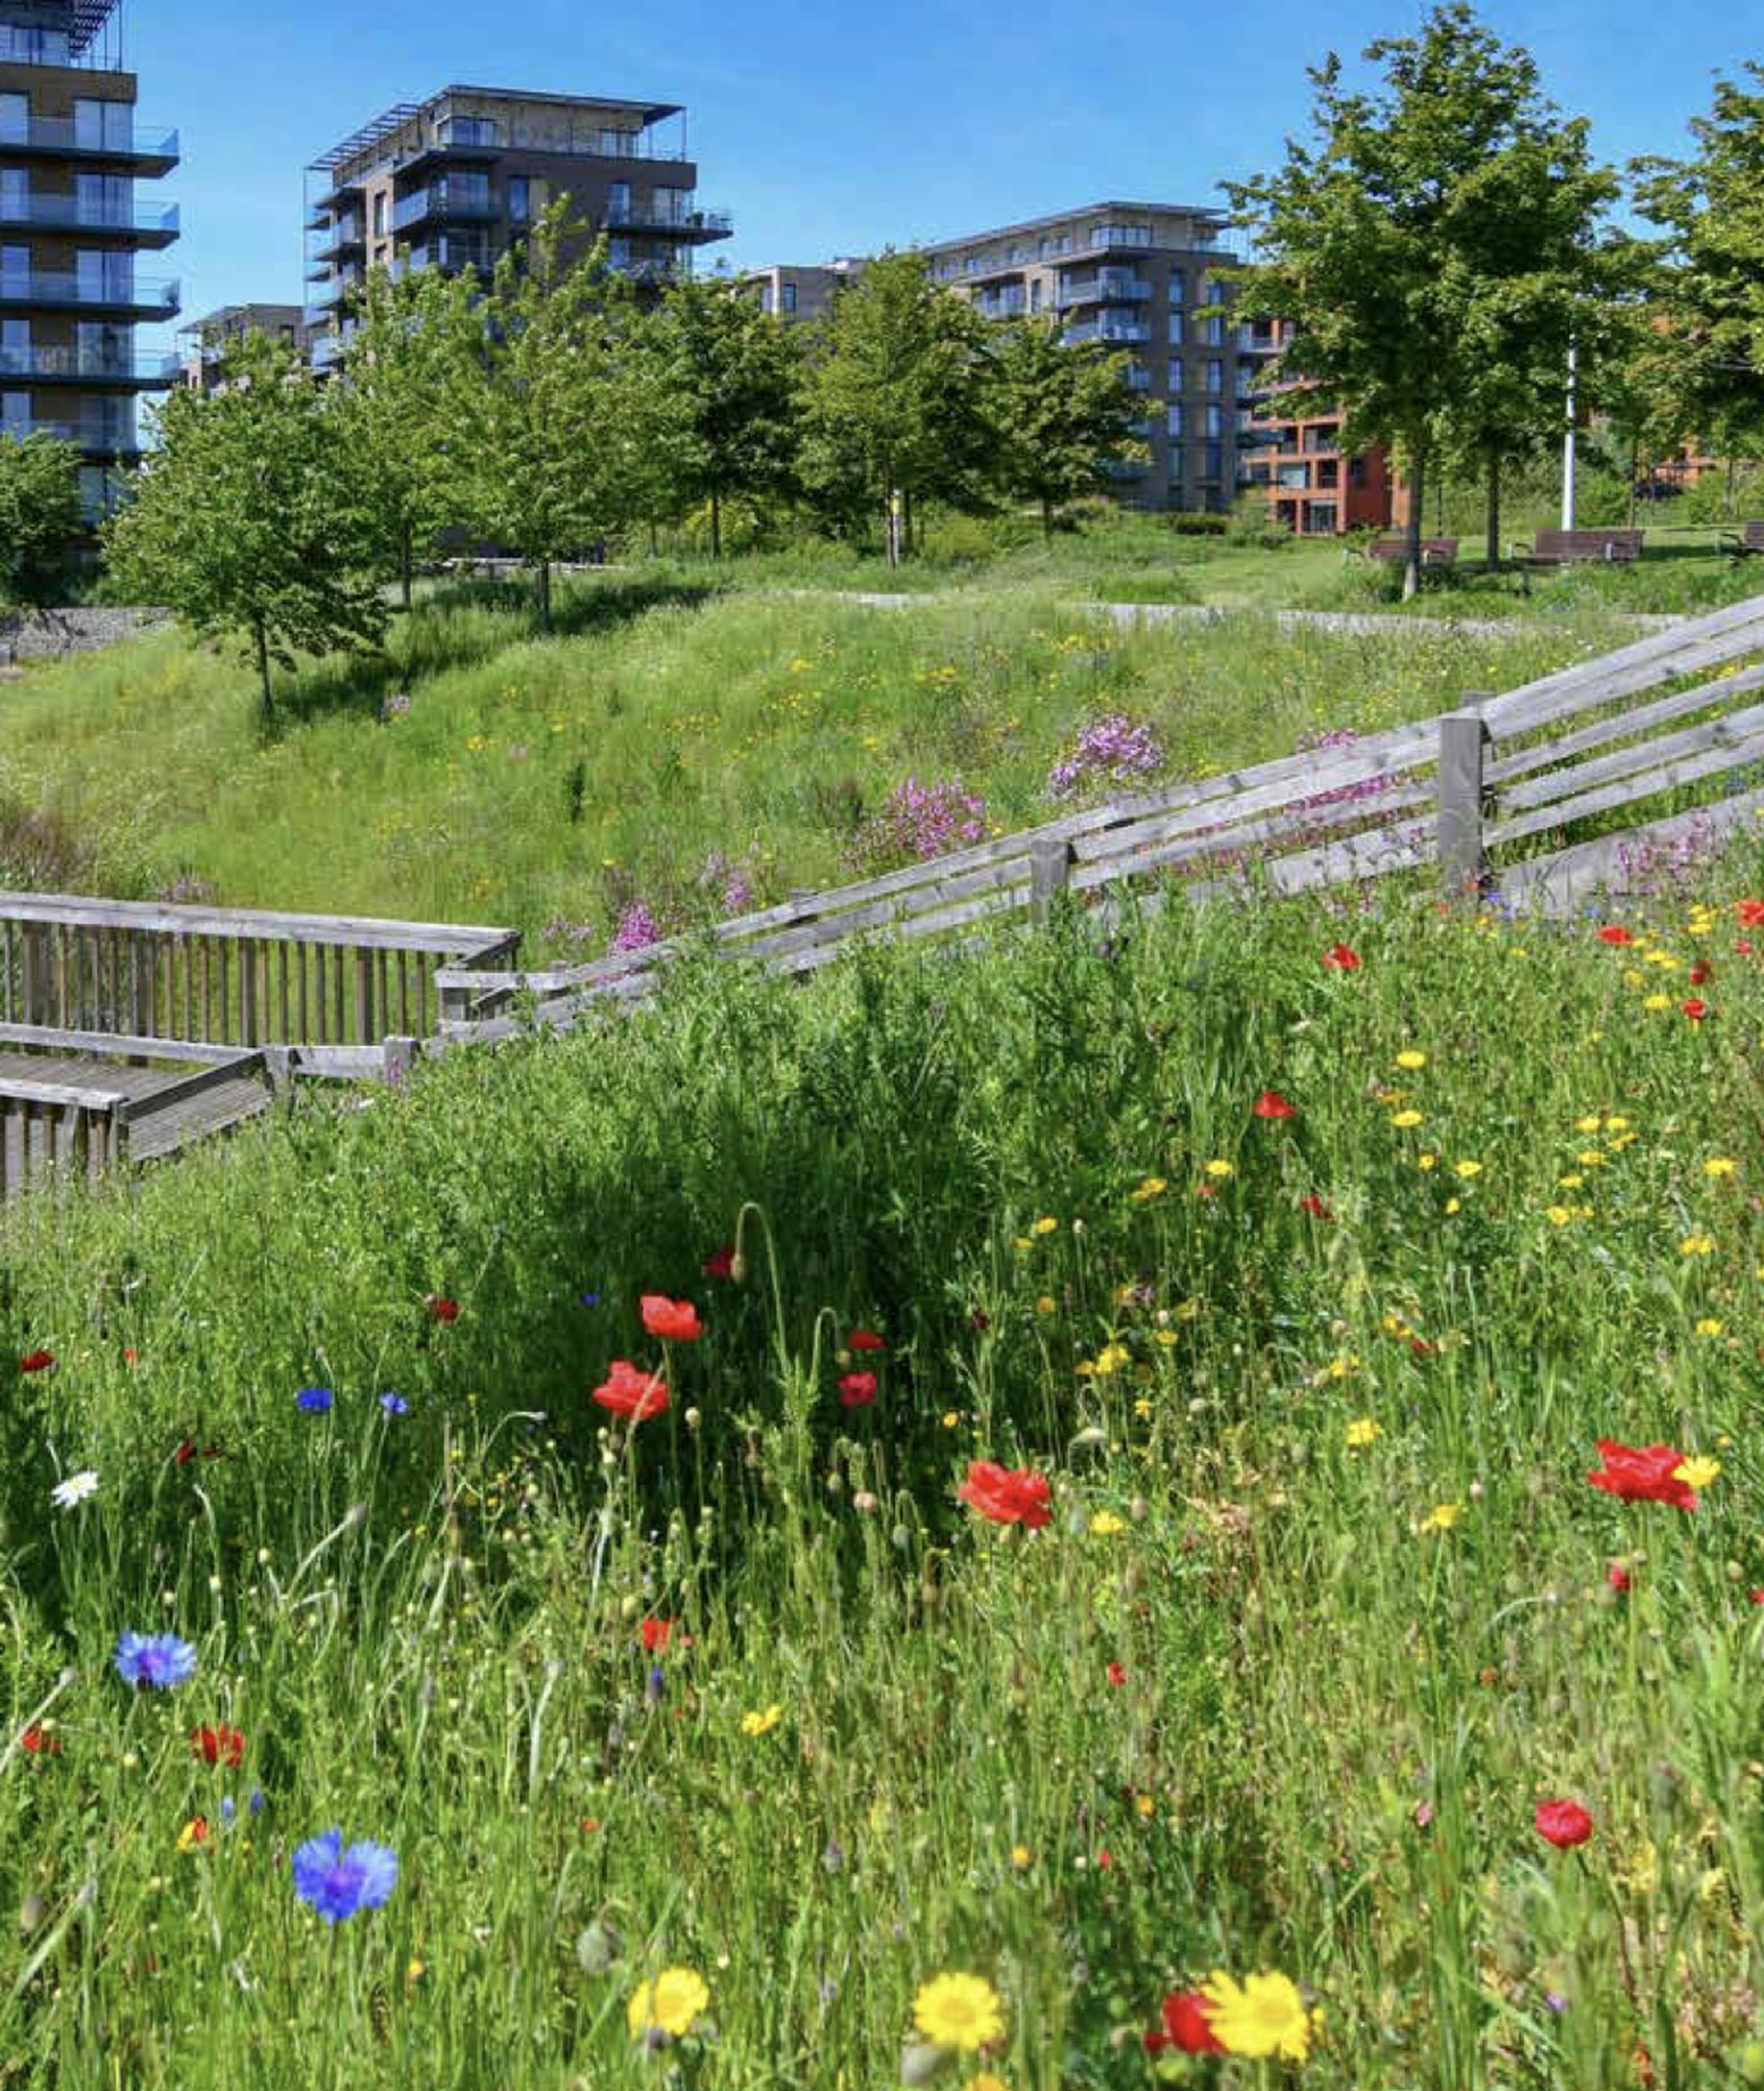 Kidbrooke Village which is being developed by Berkeley Homes, adopted the Biodiversity Net Gain principles on a voluntary basis. The site includes species-rich meadows and wetland